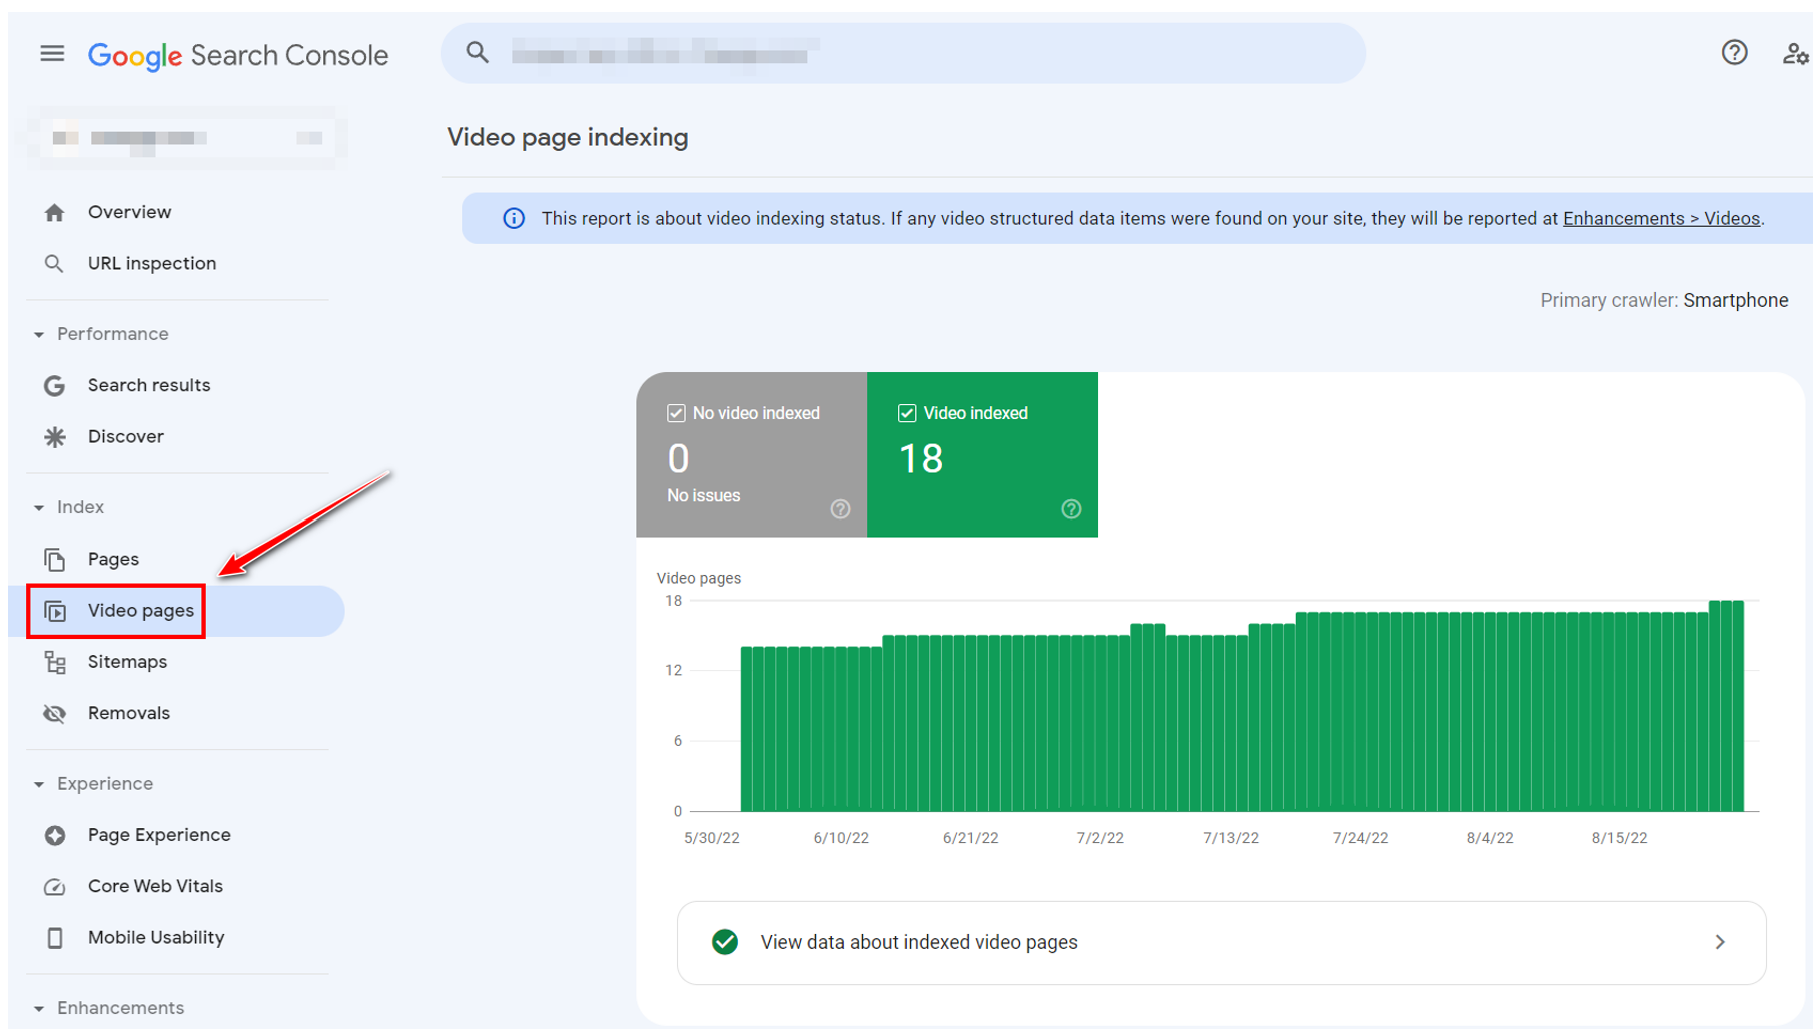 2. Google Search Console’s Video Indexing Report